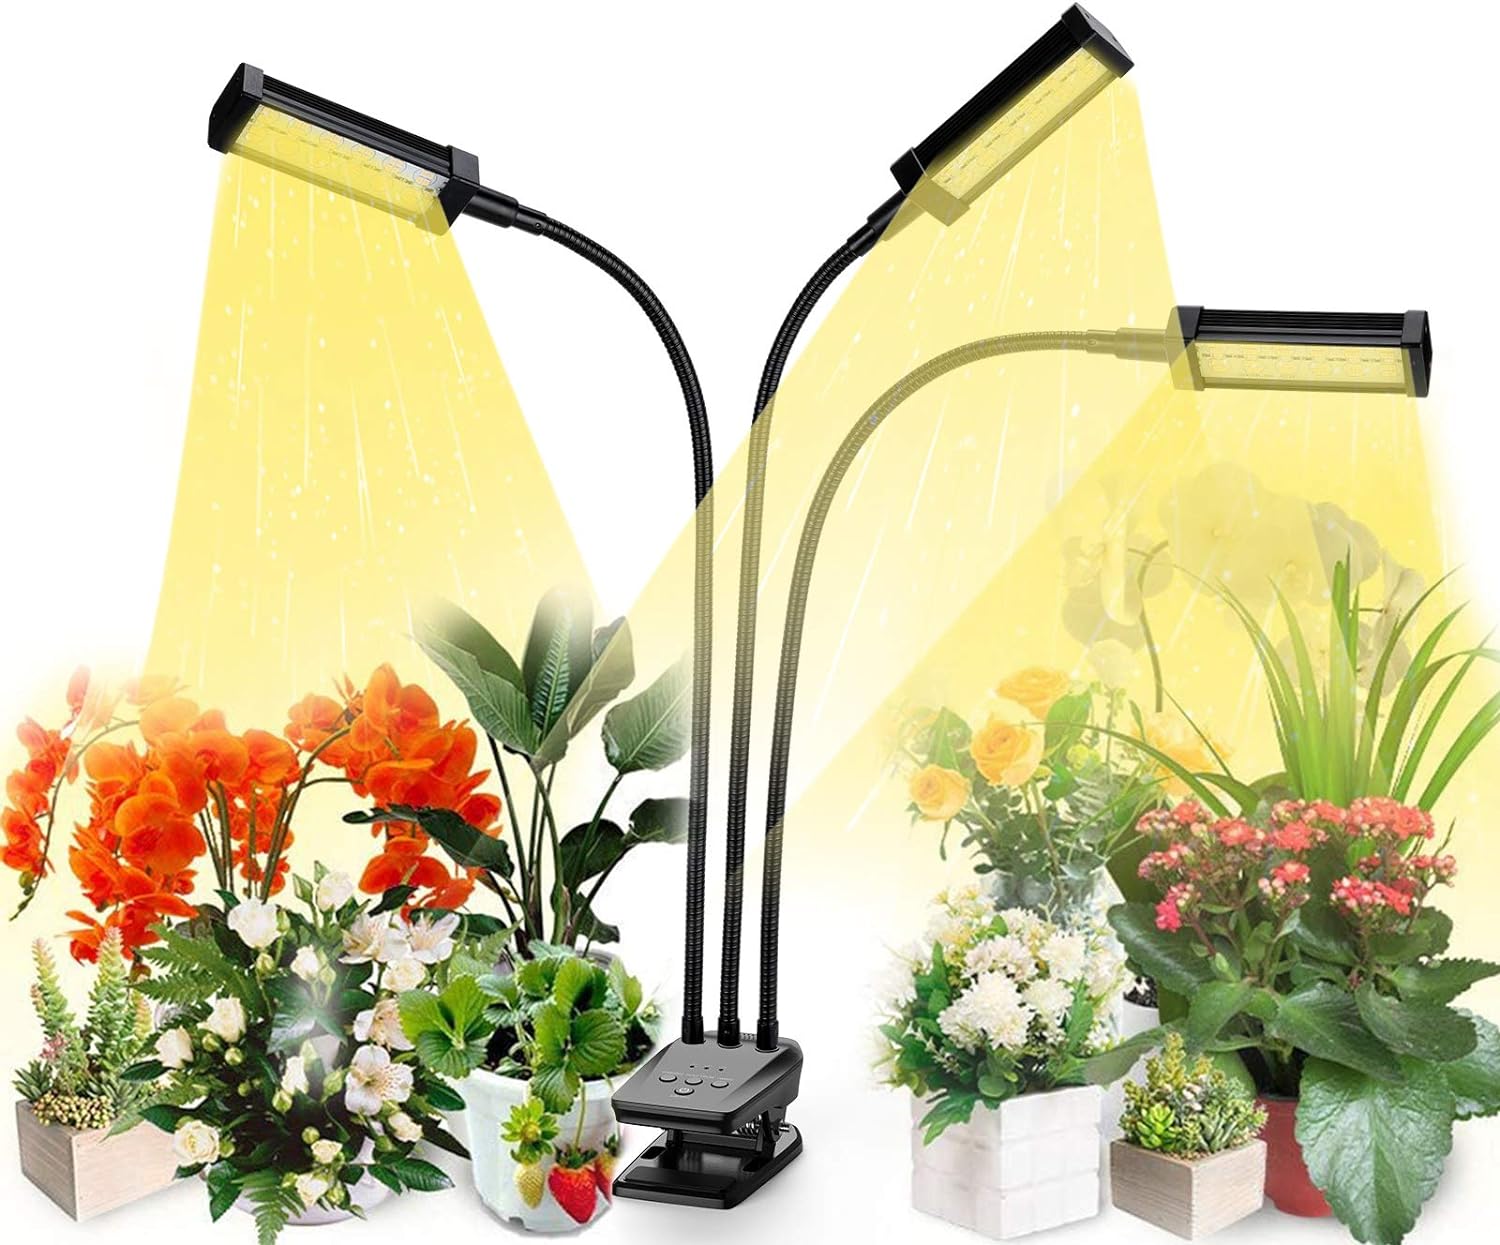 SP312 Grow Light for Indoor Plant, Full Spectrum Plant Grow Light with Desk Clip, 0-24H Timer, 4 Switch Modes for Succulents, Seedlings, House Garden